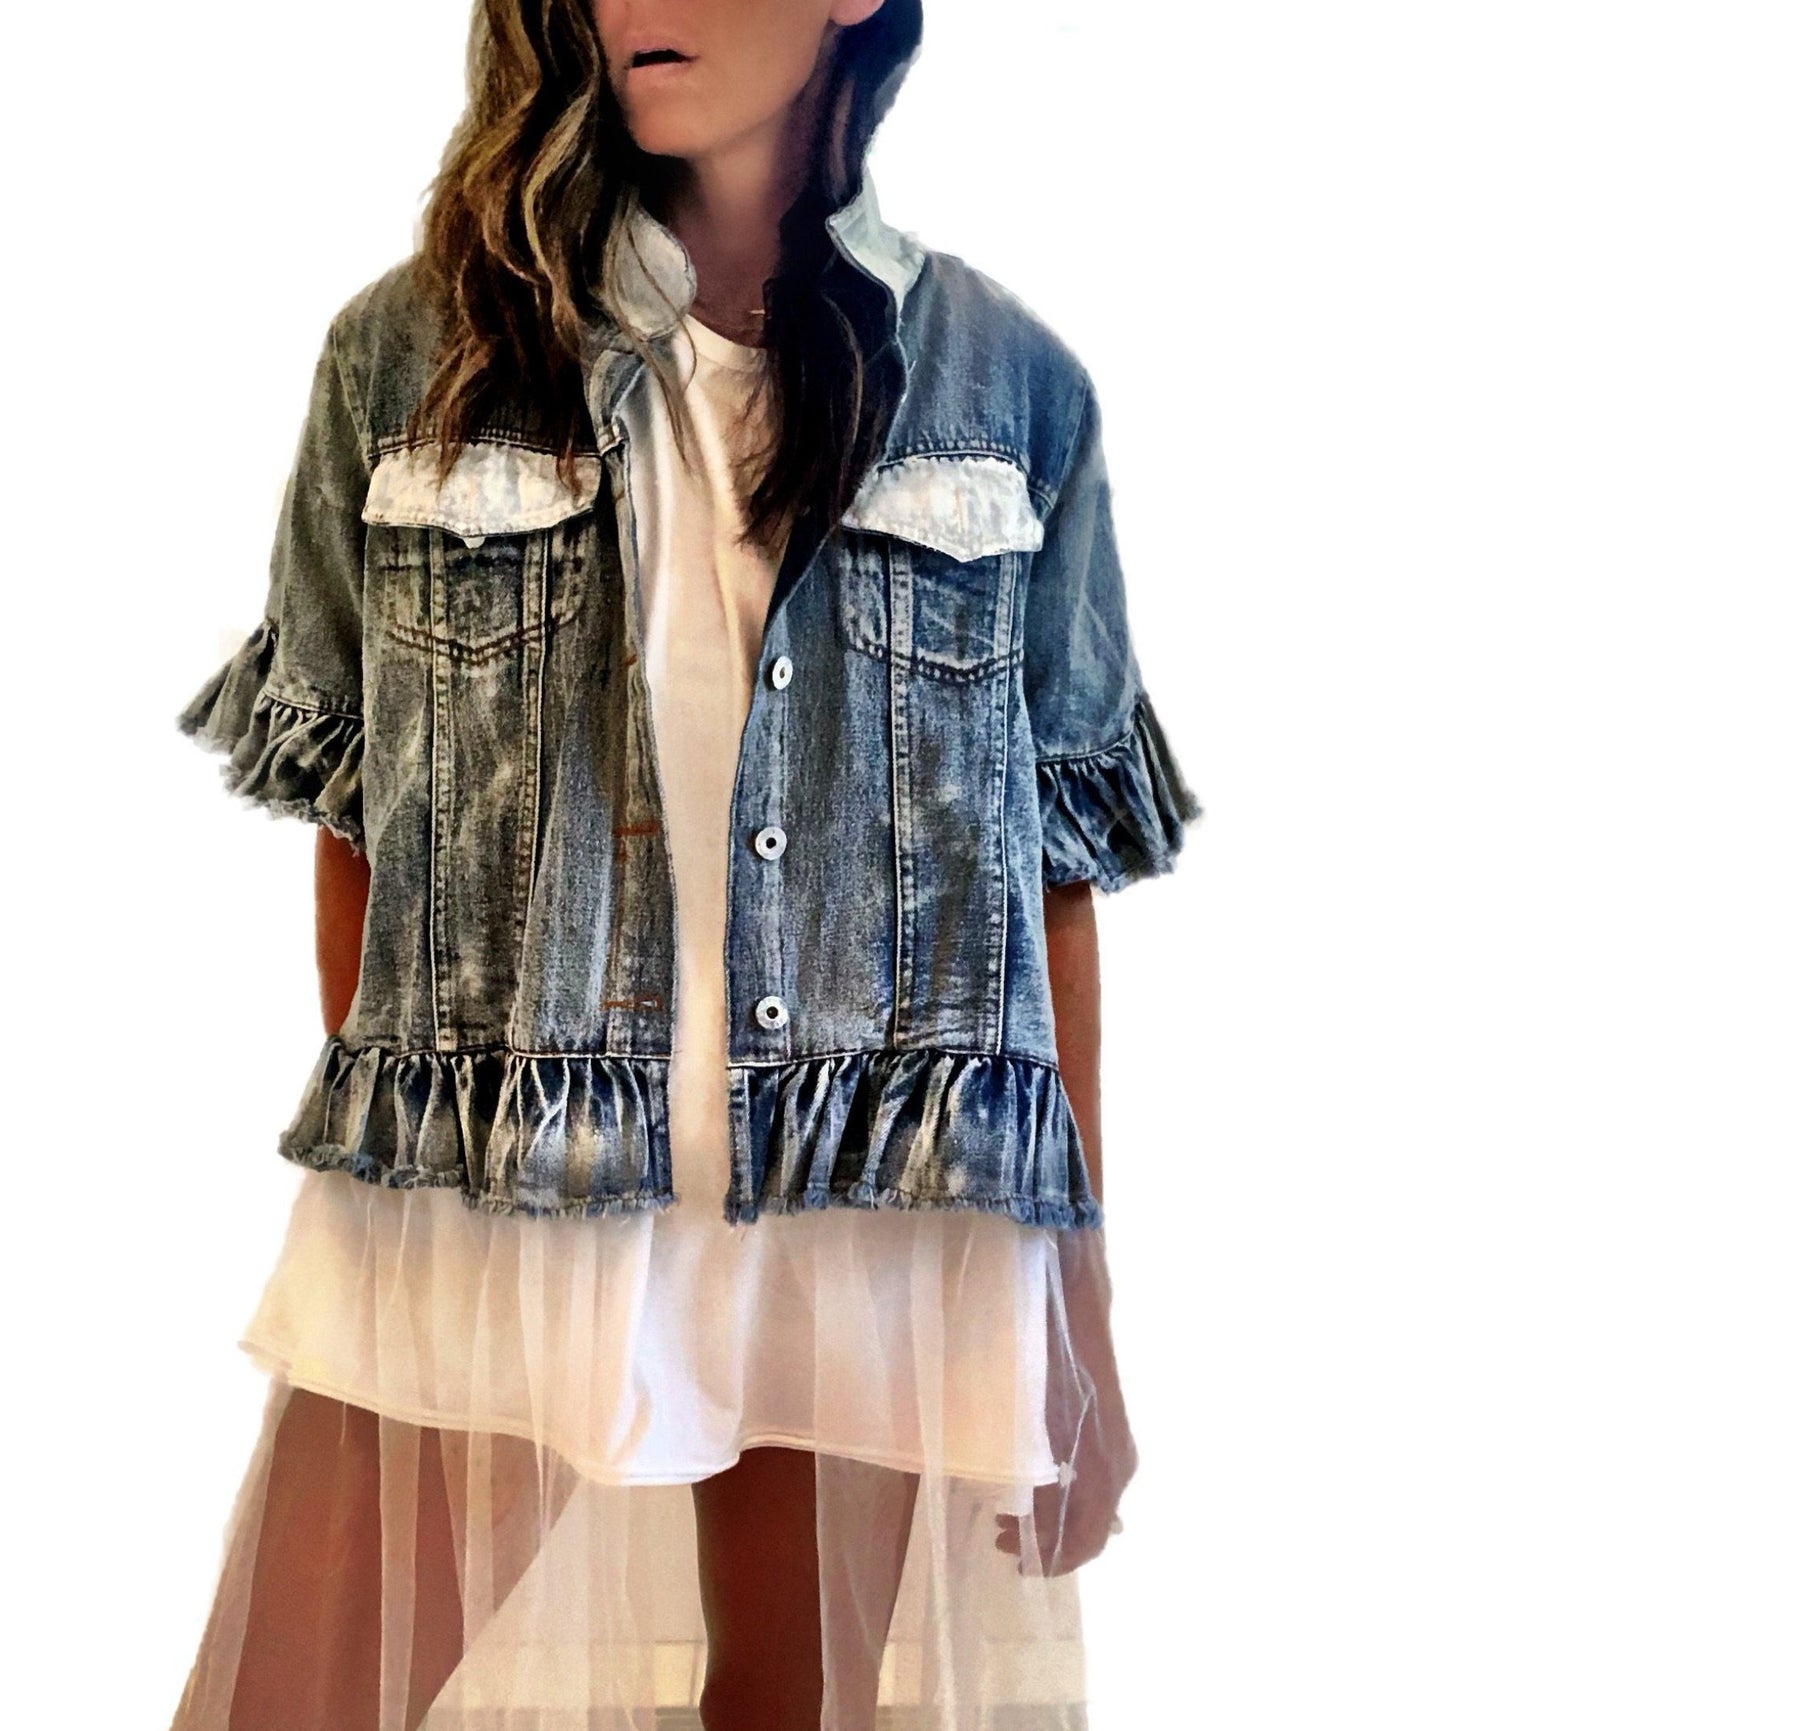 Medium blue denim short sleeve jacket with layer of long white tulle. Surfs up hand symbol painted in white on the back, with rings on the fingers. Collar and front pockets painted in white. Signed @wrenandglory.